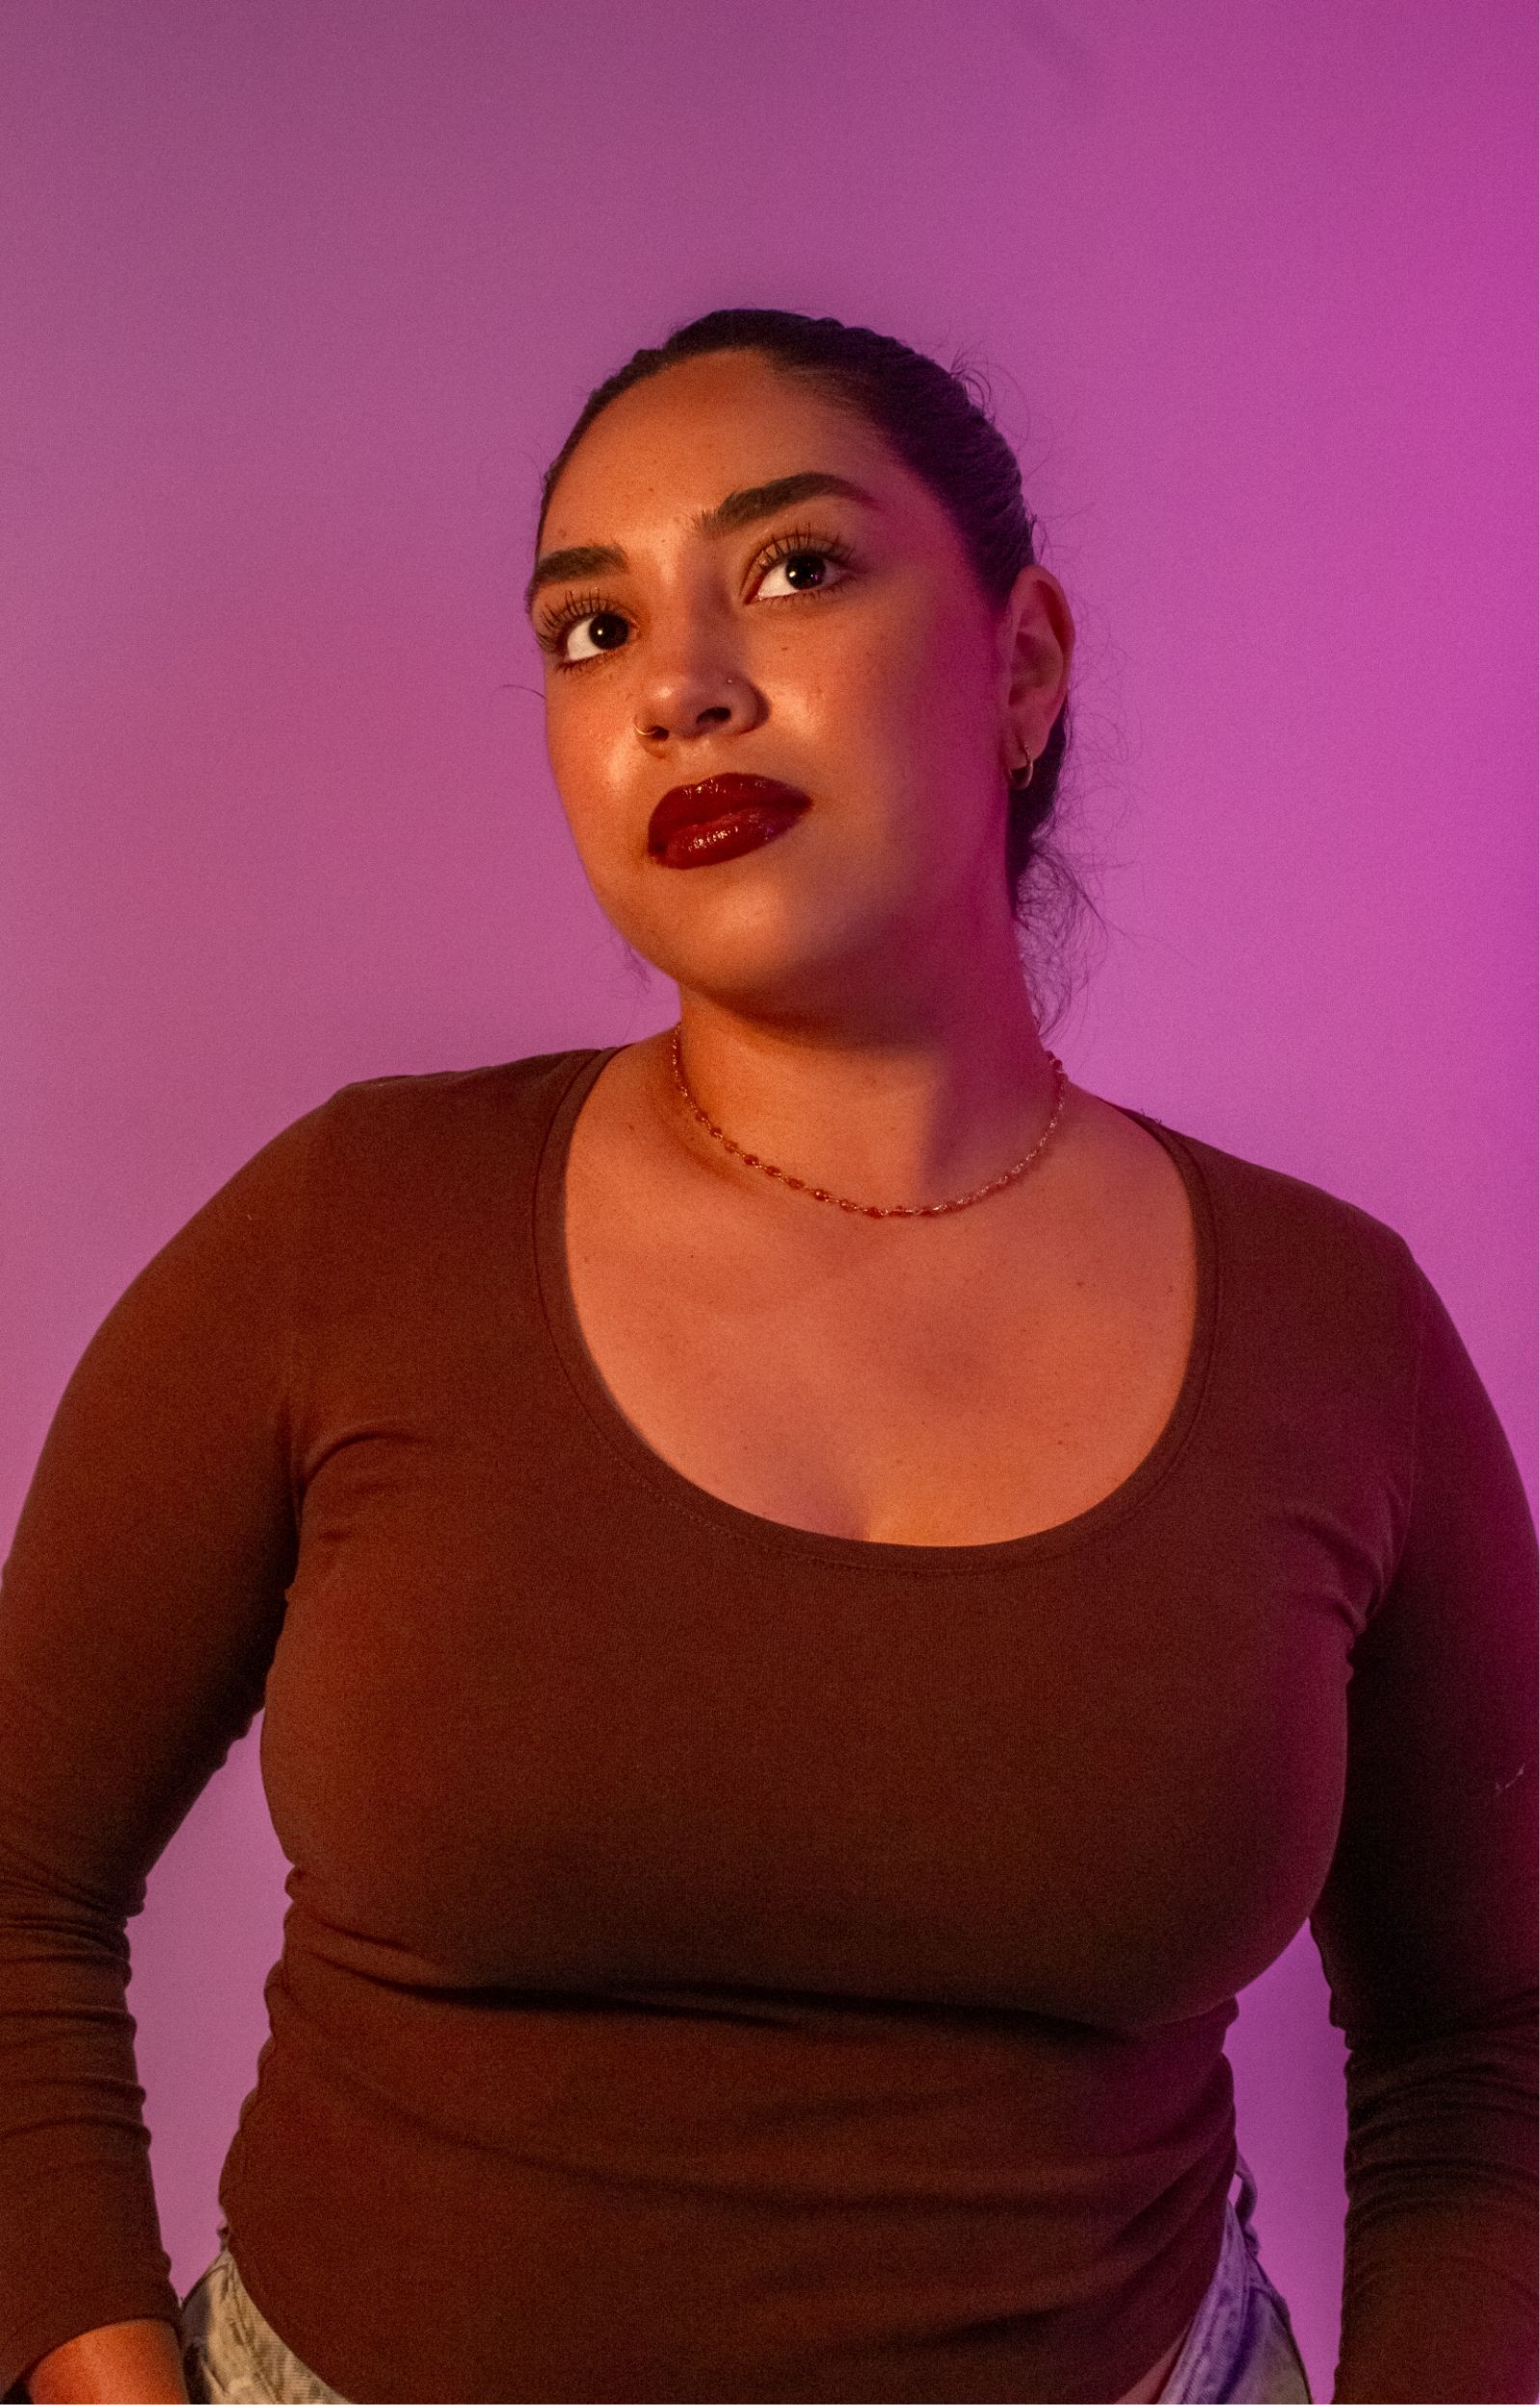 A woman wearing a brown top and a necklace stands against a purple-lit background, looking upwards with a focused expression.